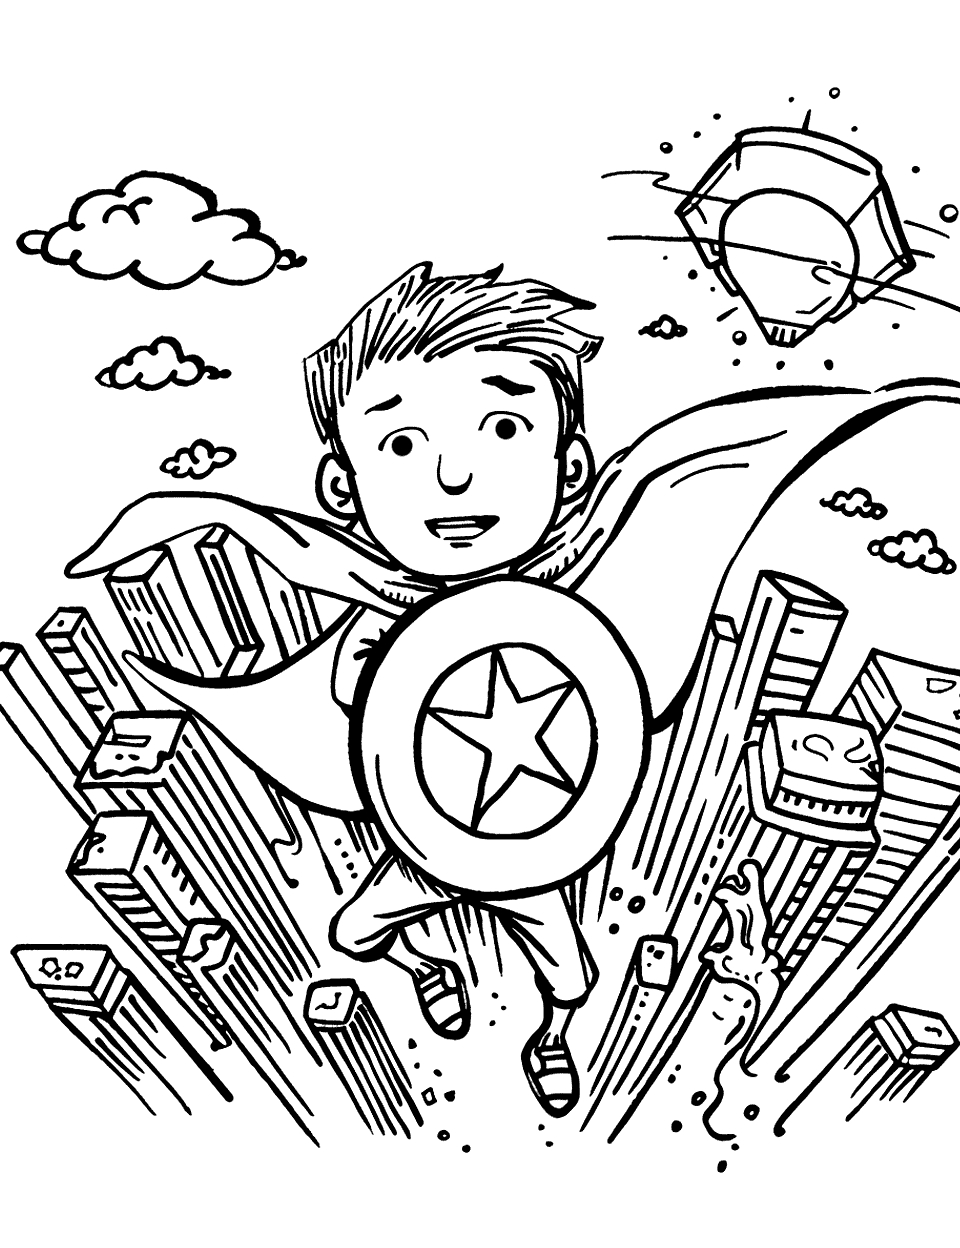 Circle Power Shapes Coloring Page - A superhero with a circle-shaped shield flying over a minimalist cityscape.